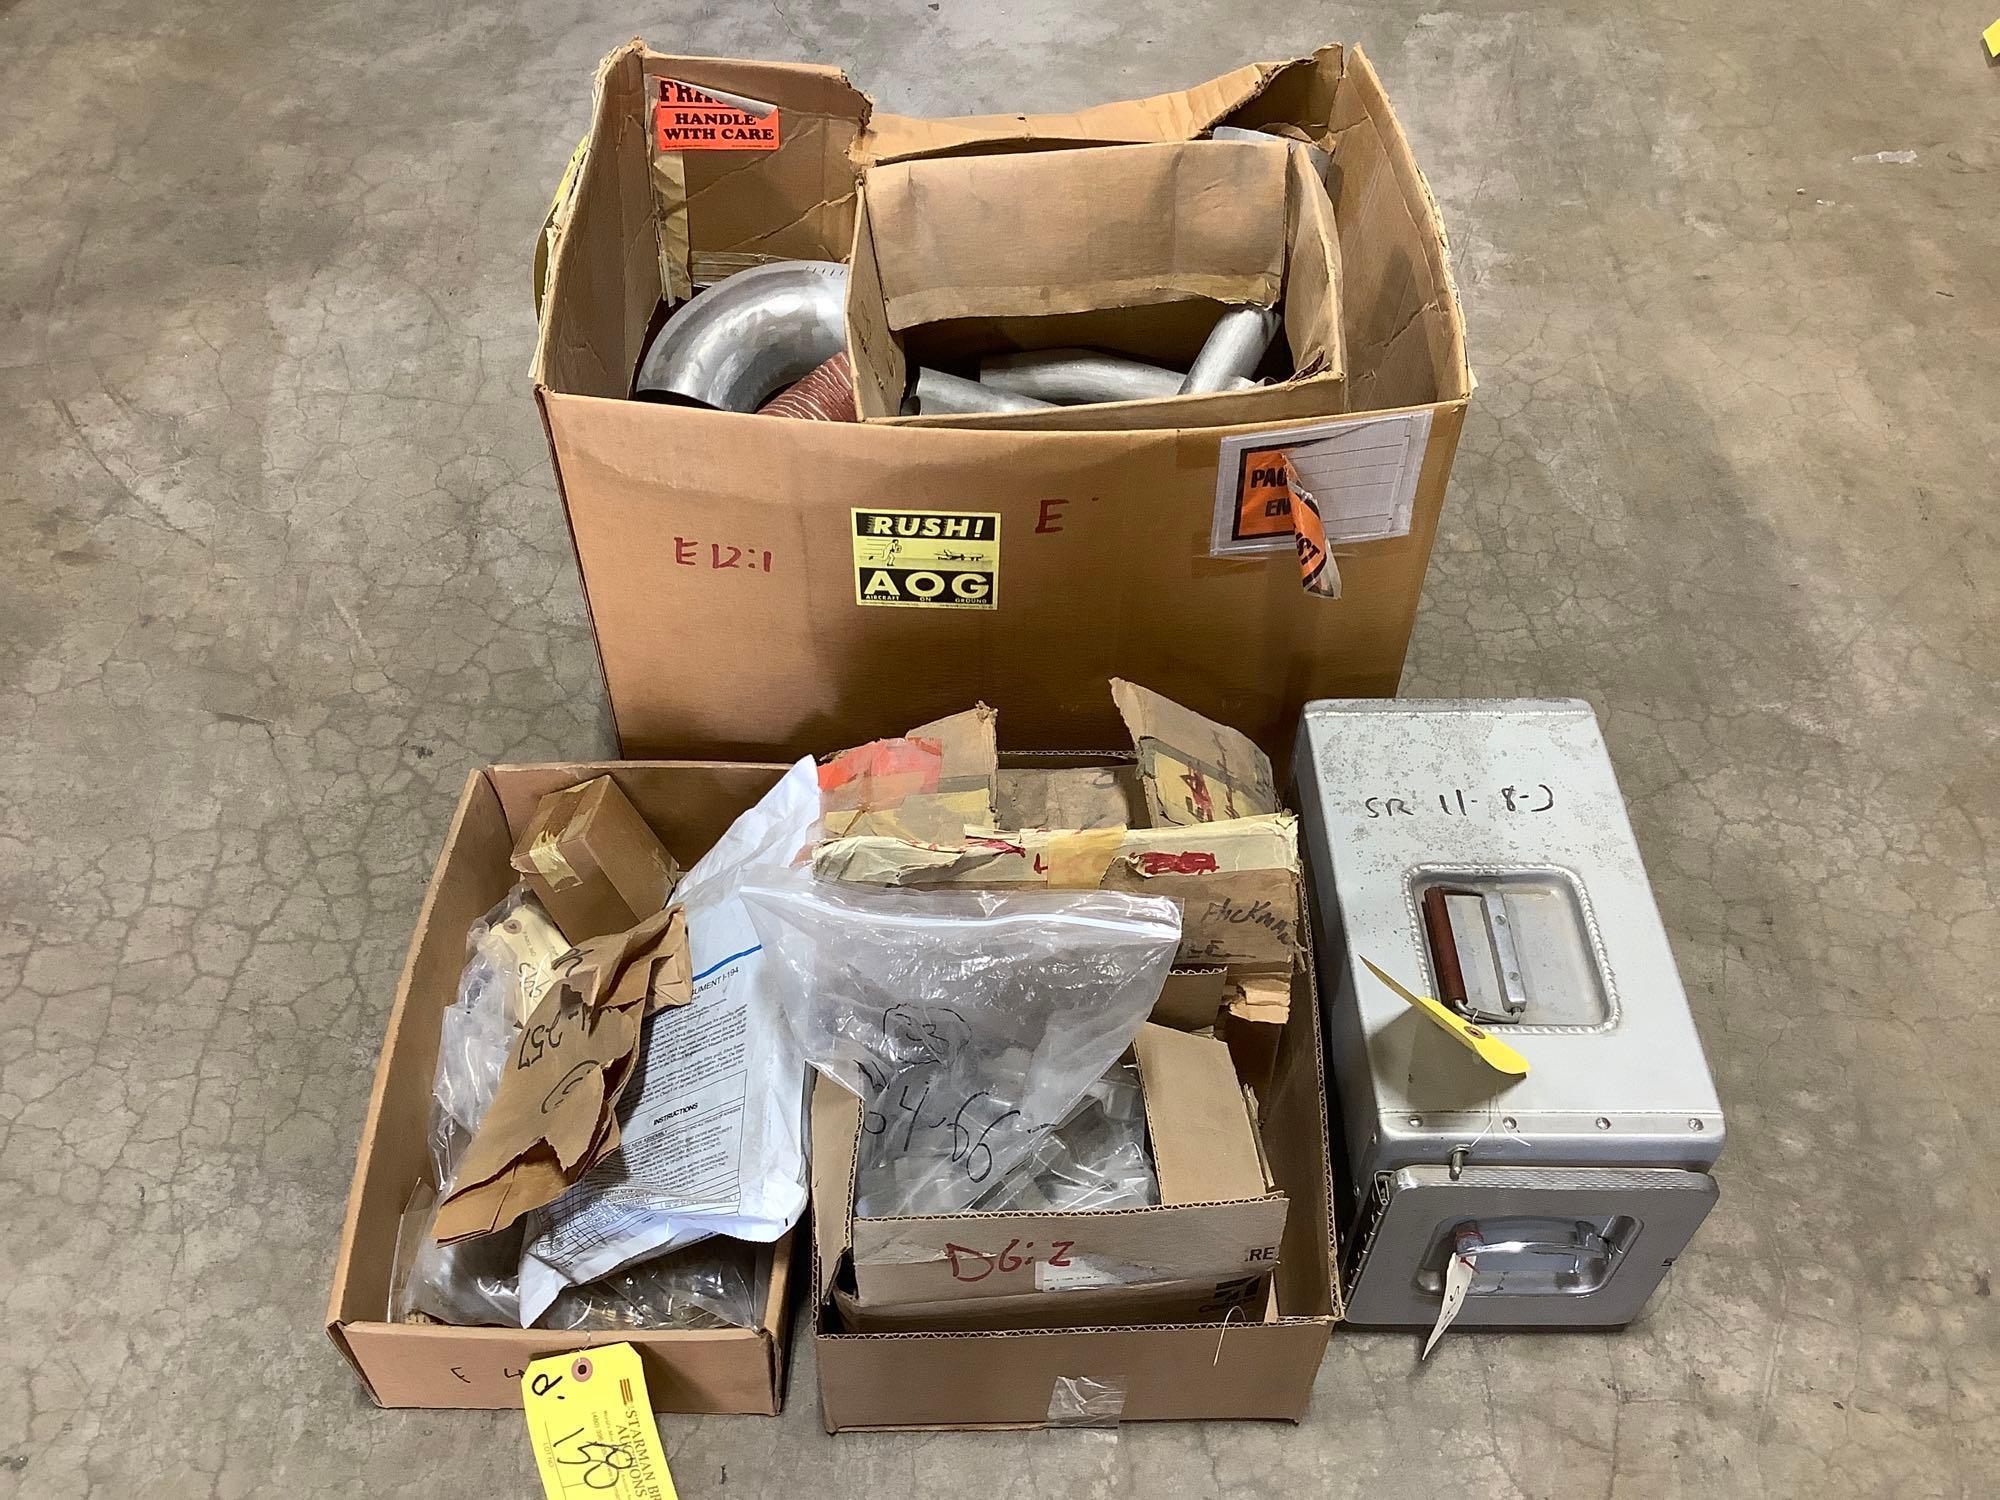 (LOT) FOOD CONTAINER, ASHTRAYS, KEY LOCKS, EXHAUST & MISC